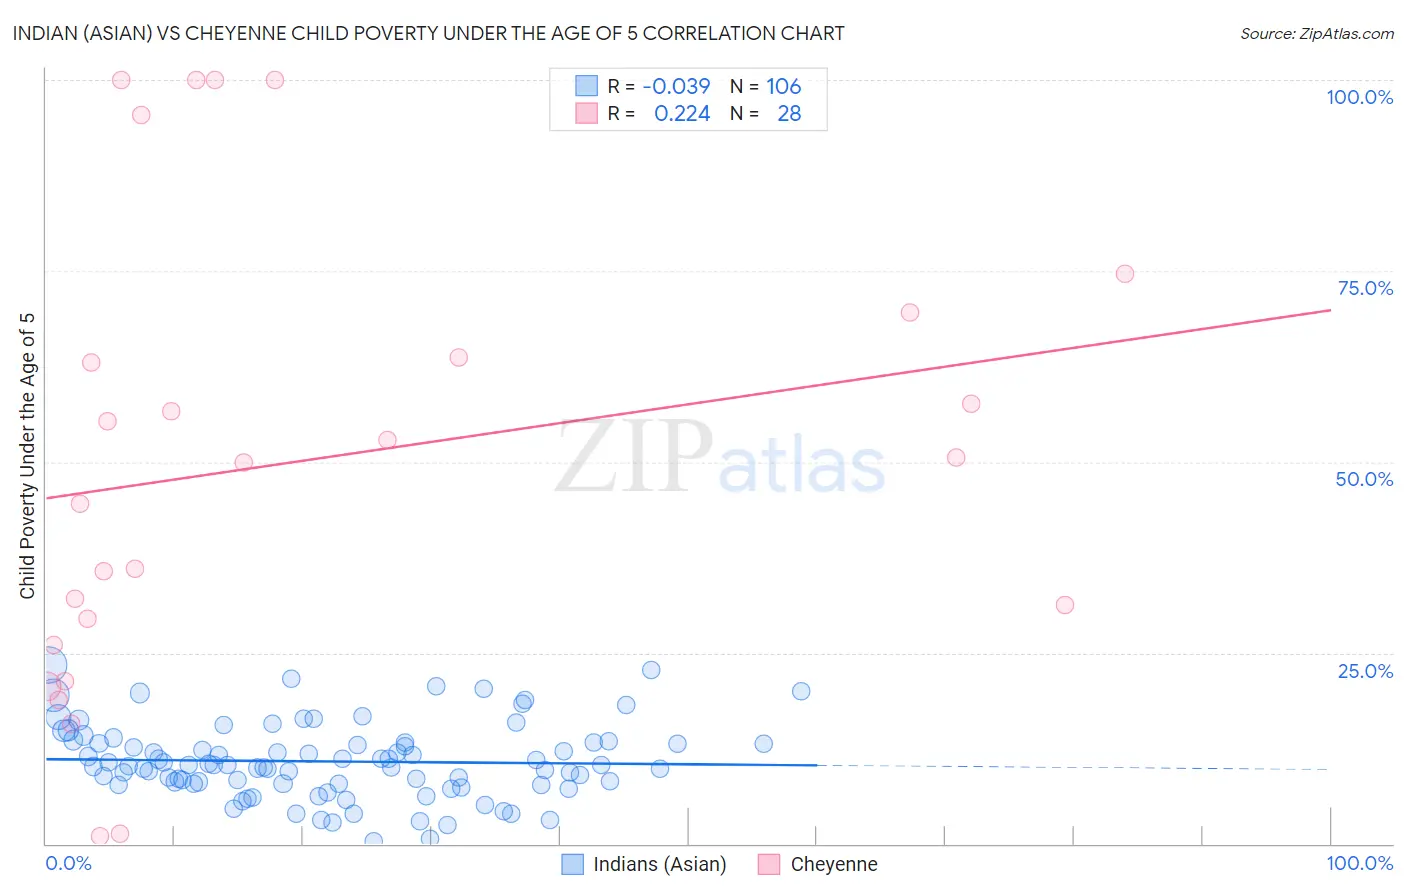 Indian (Asian) vs Cheyenne Child Poverty Under the Age of 5